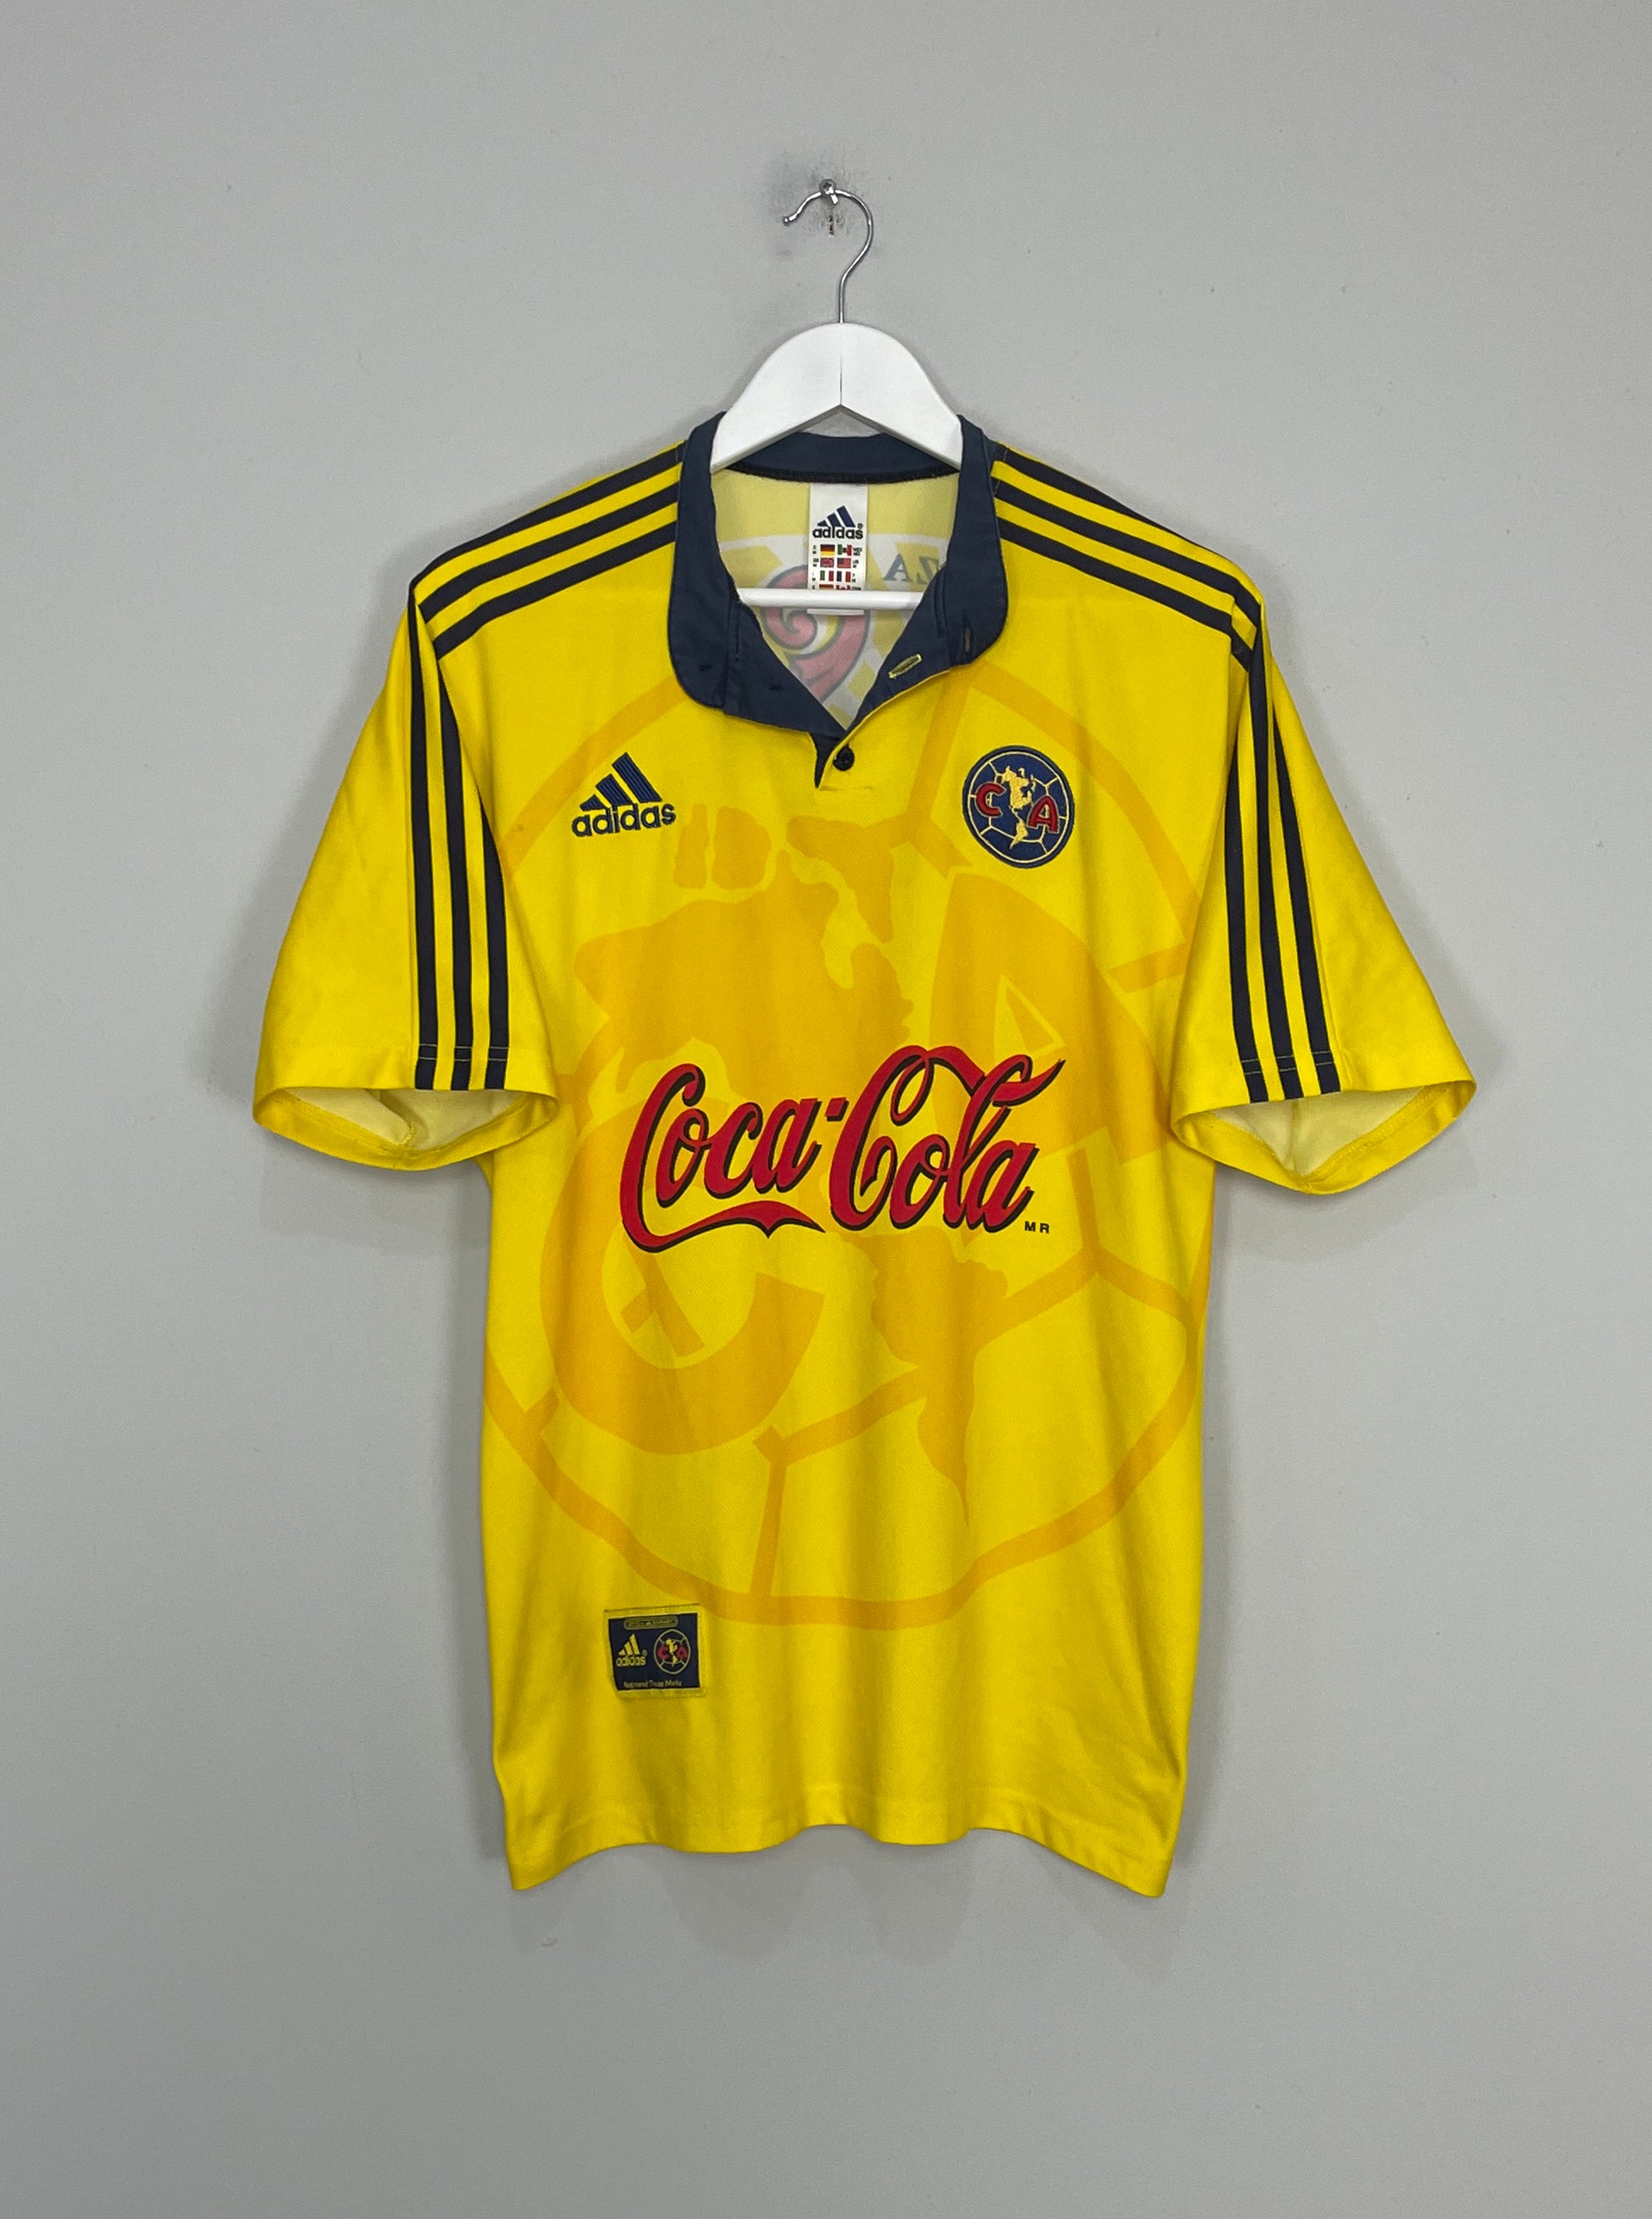 Image of the Club America shirt from the 1999/00 season